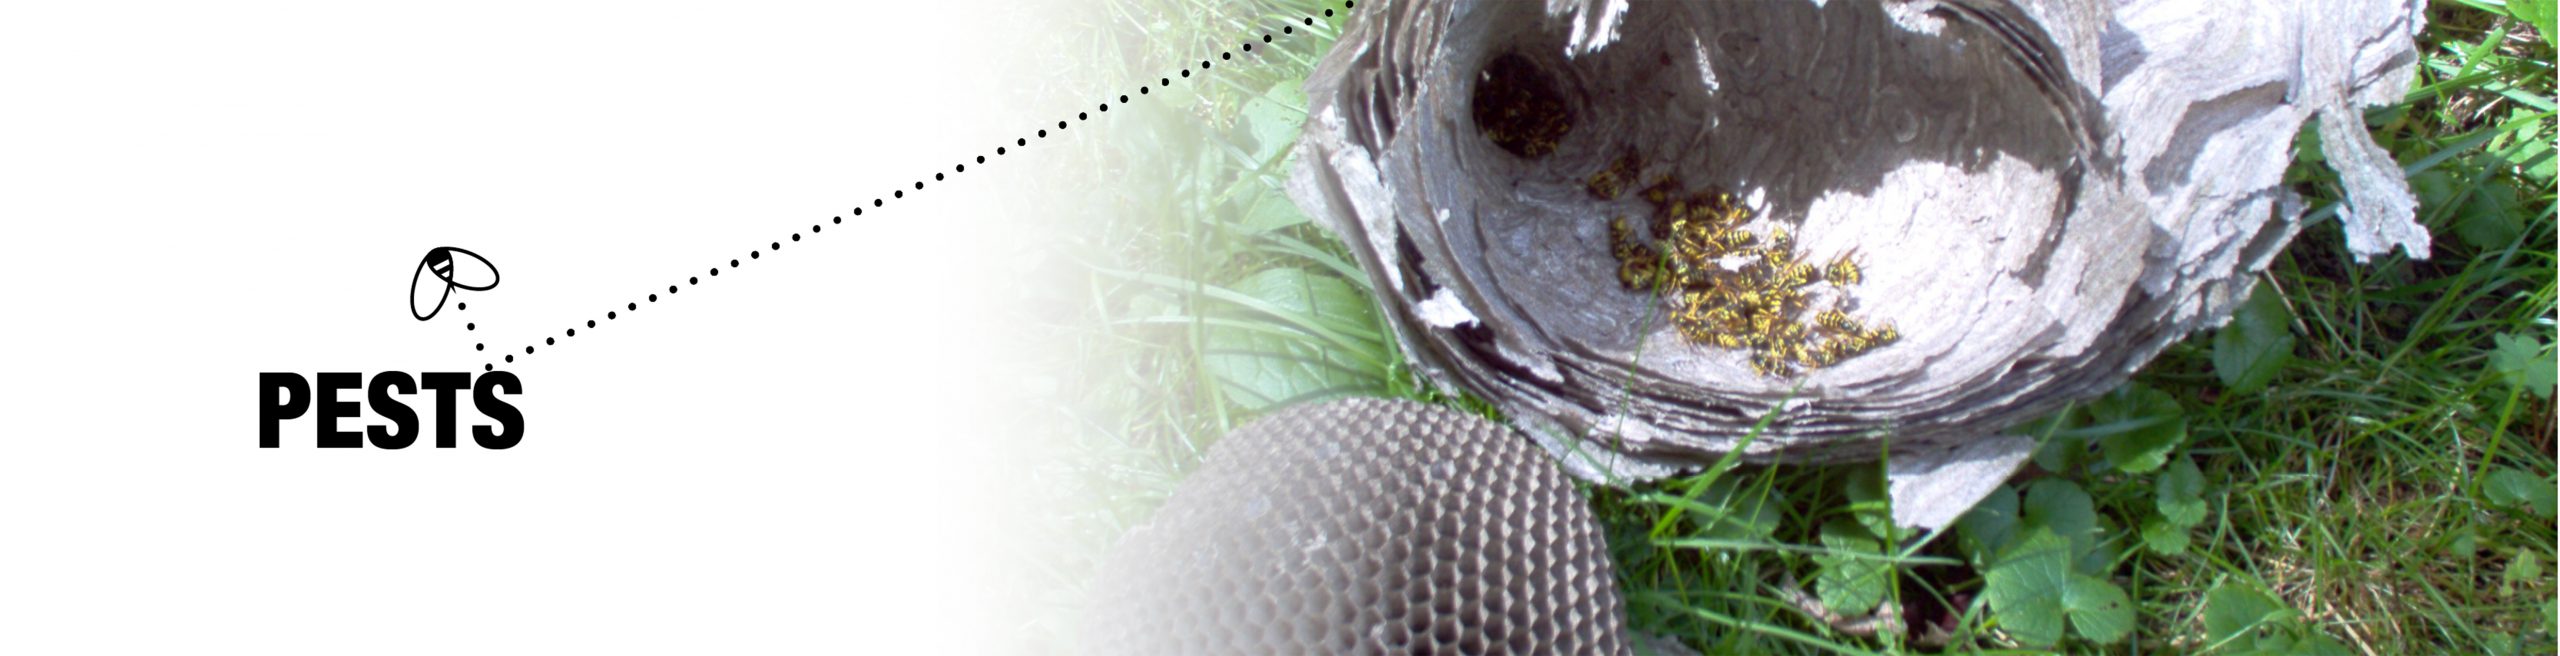 Pests header and image of a wasp nest